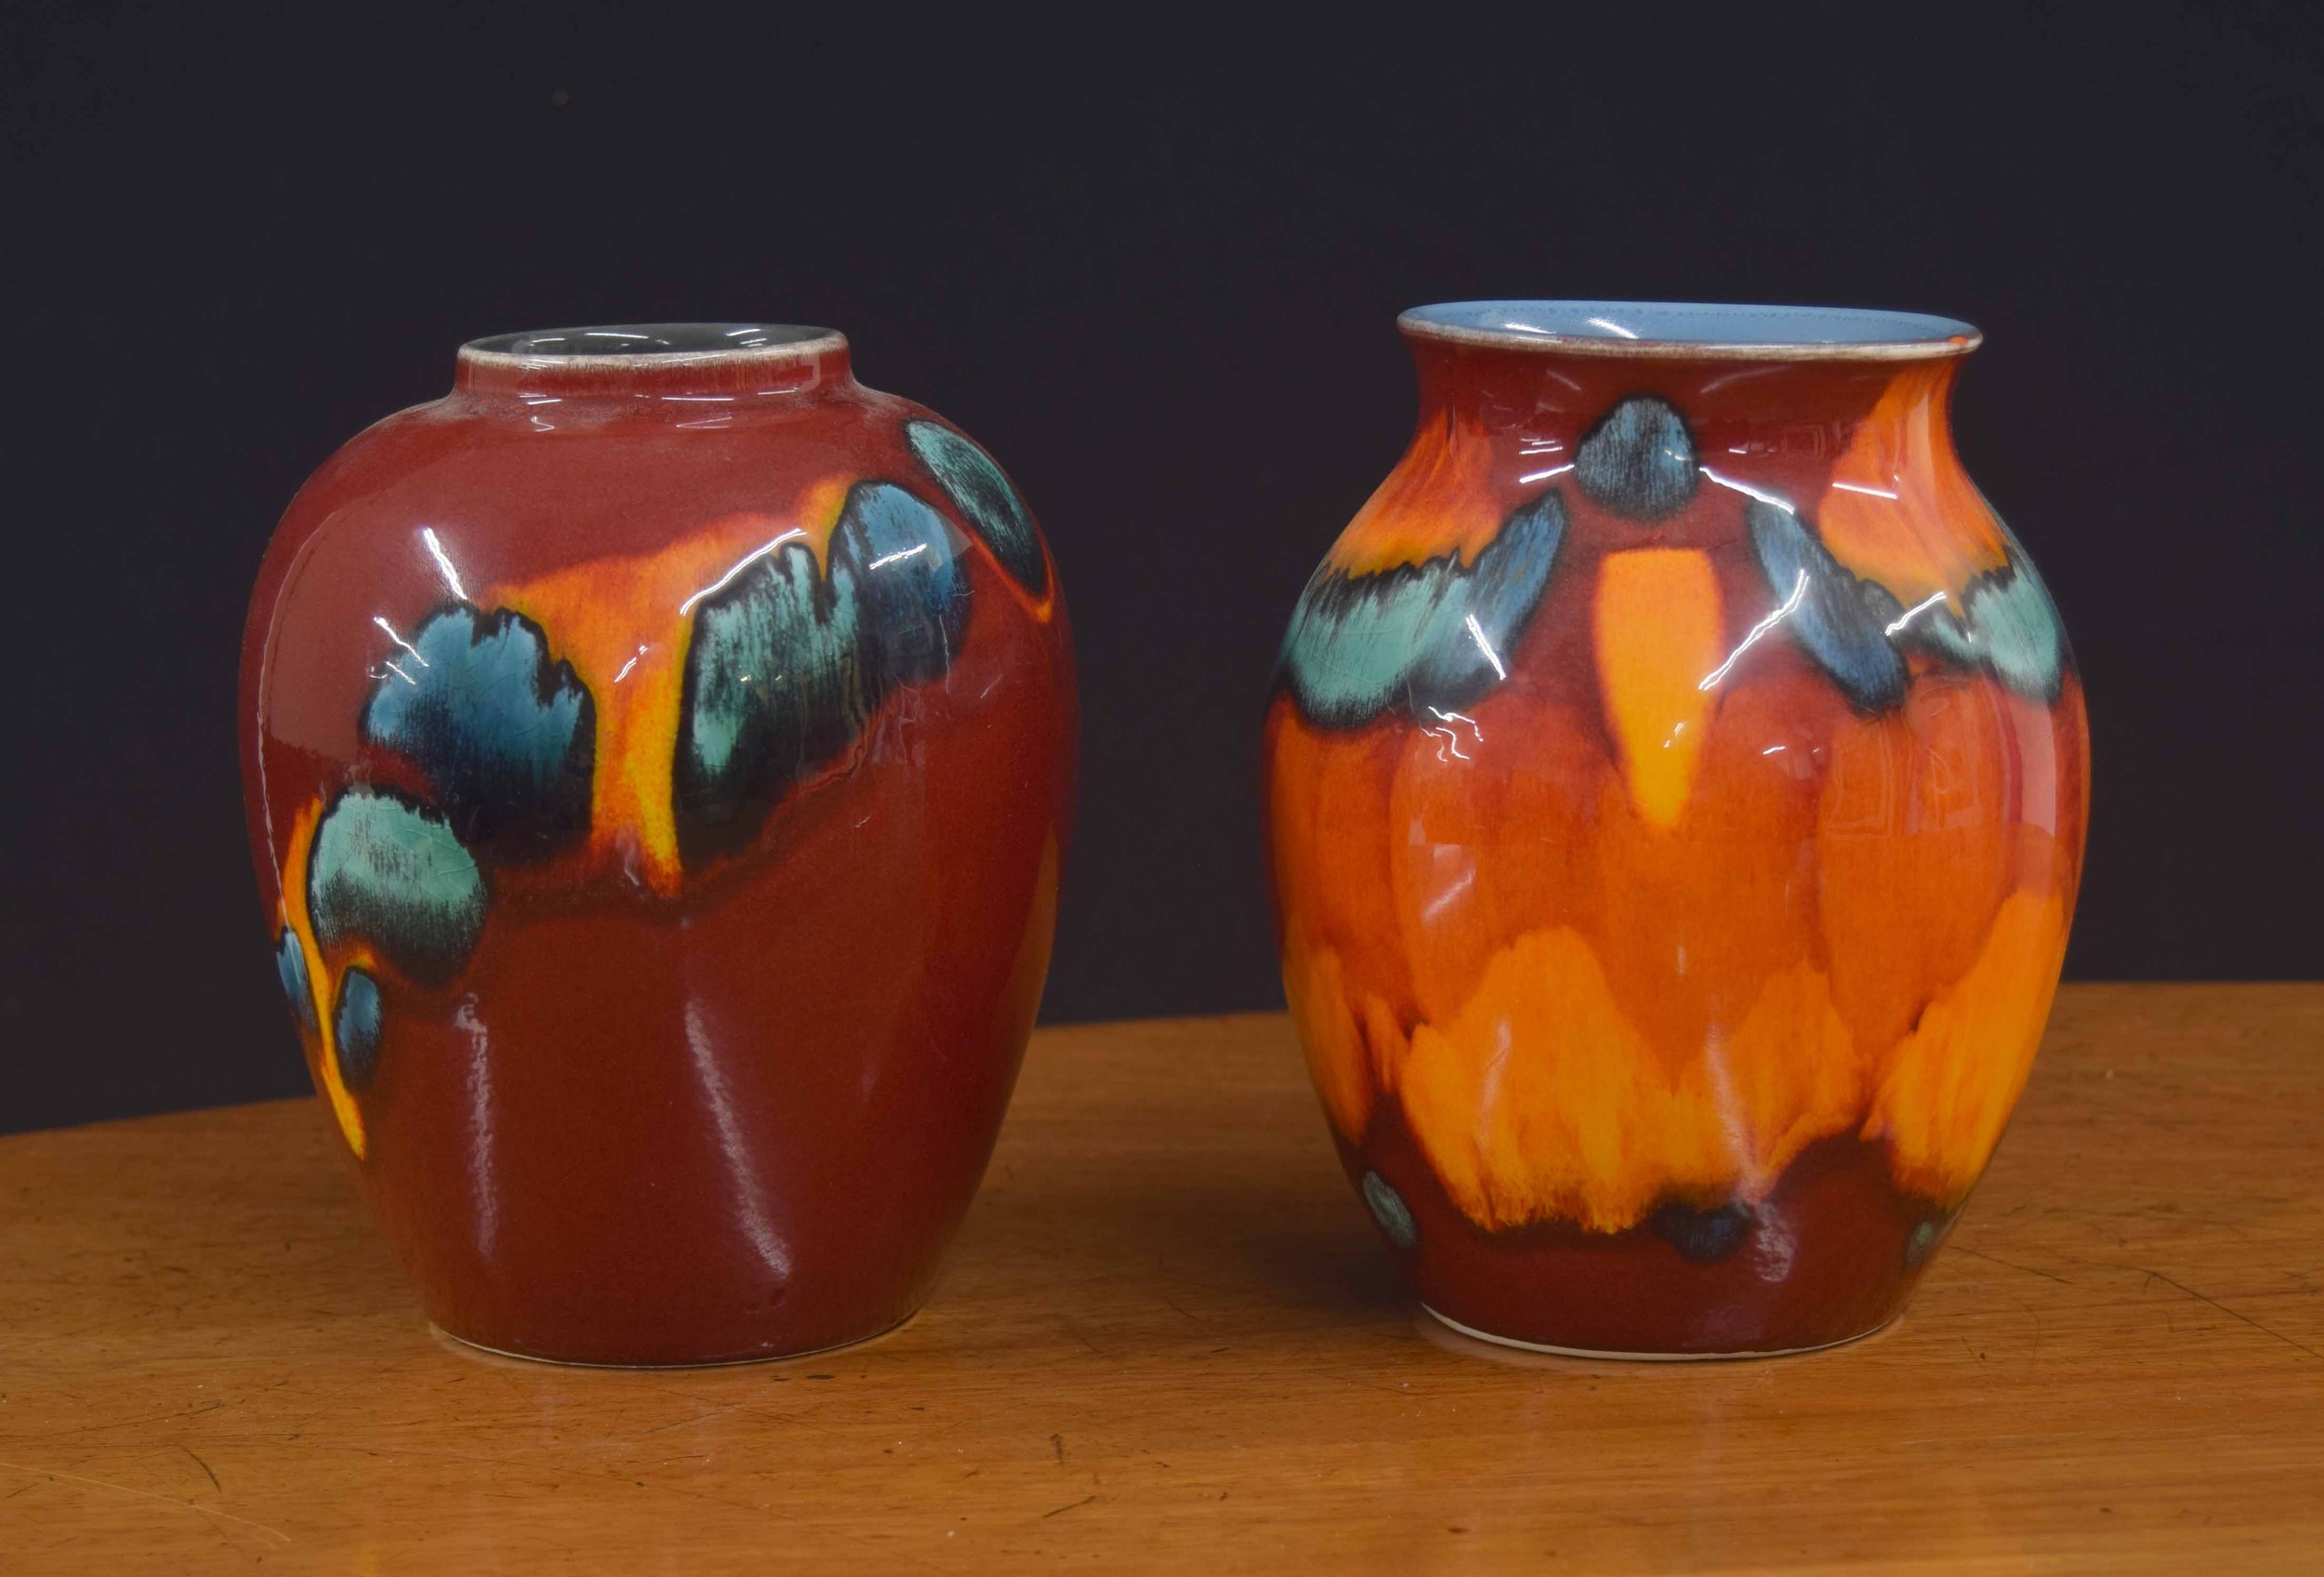 Poole Pottery 'Odyssey' vase, 6.5" high; together with a Poole 'Volcano' vase, 6.25" high (2)